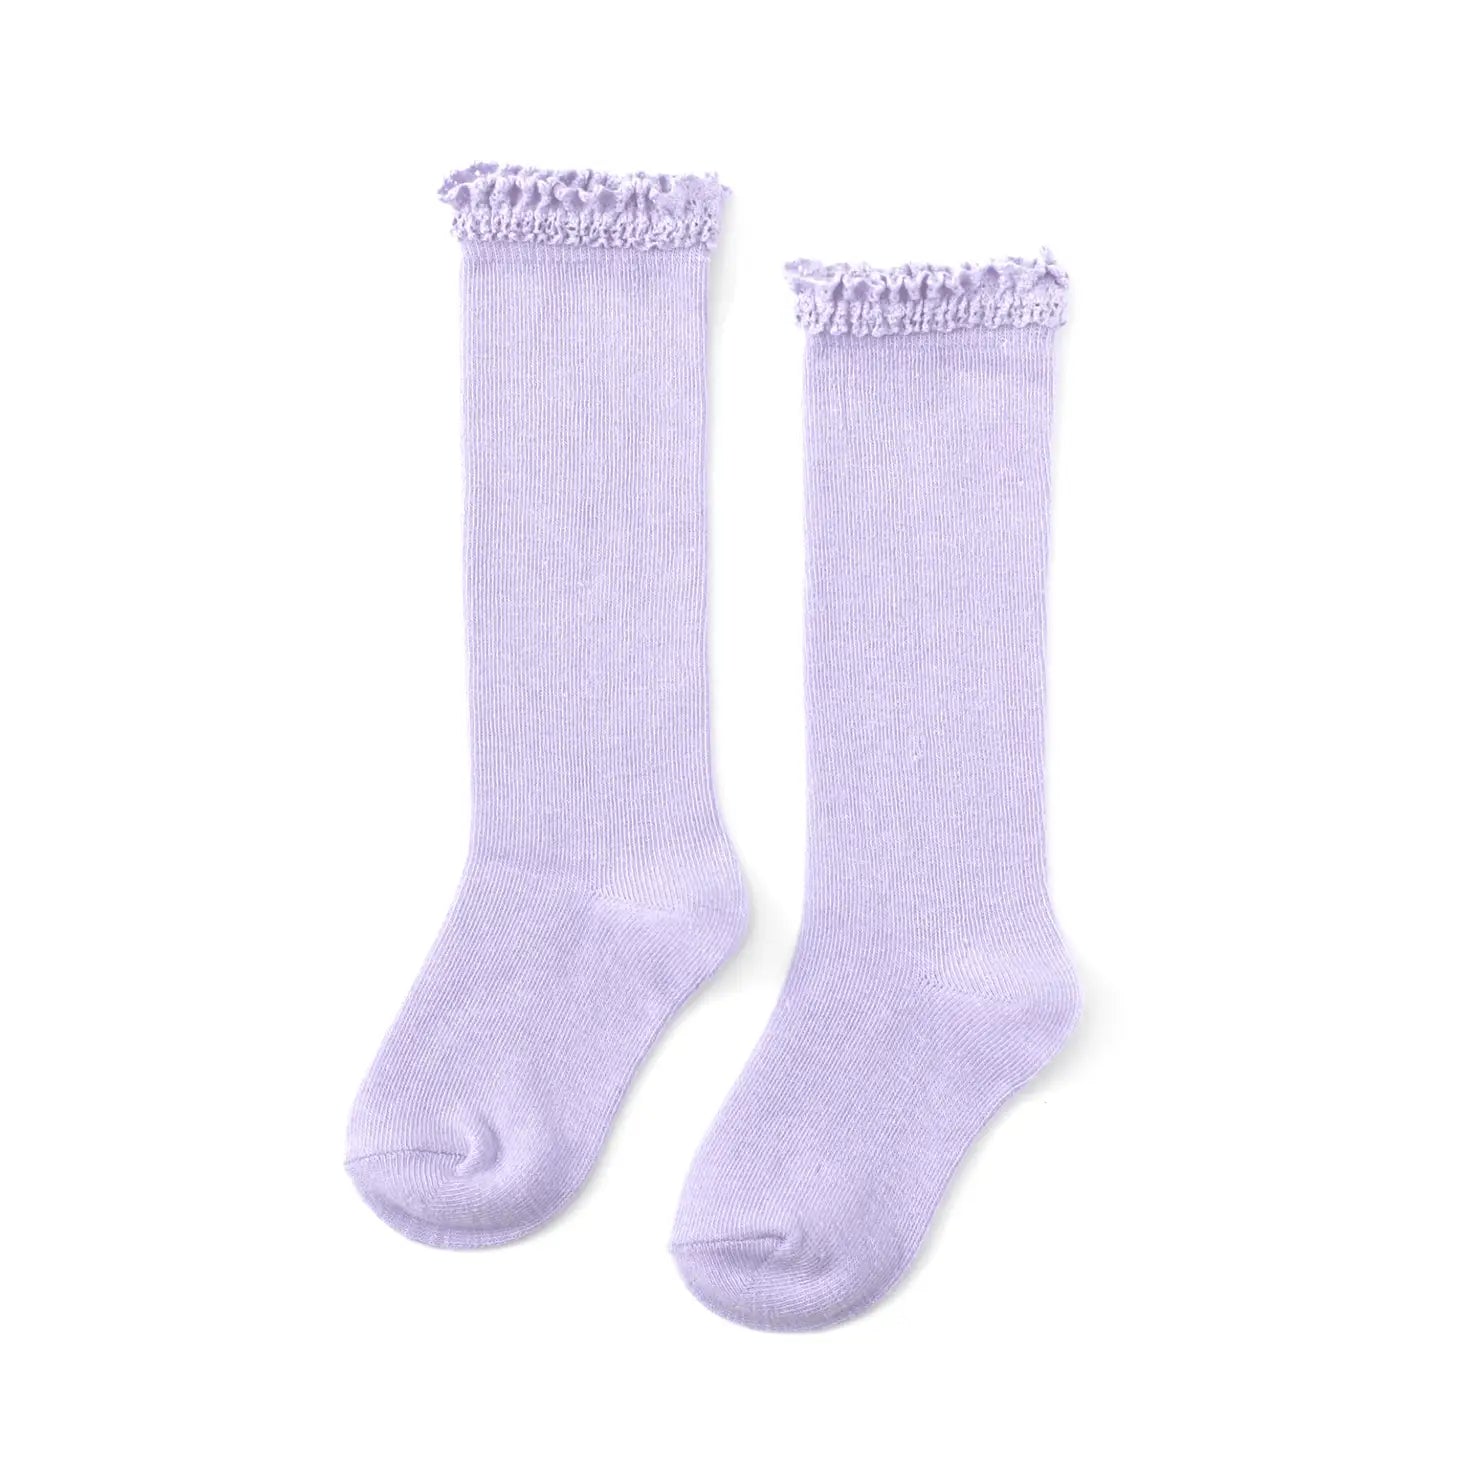 NEW Lavender Lace Top Knee High Socks